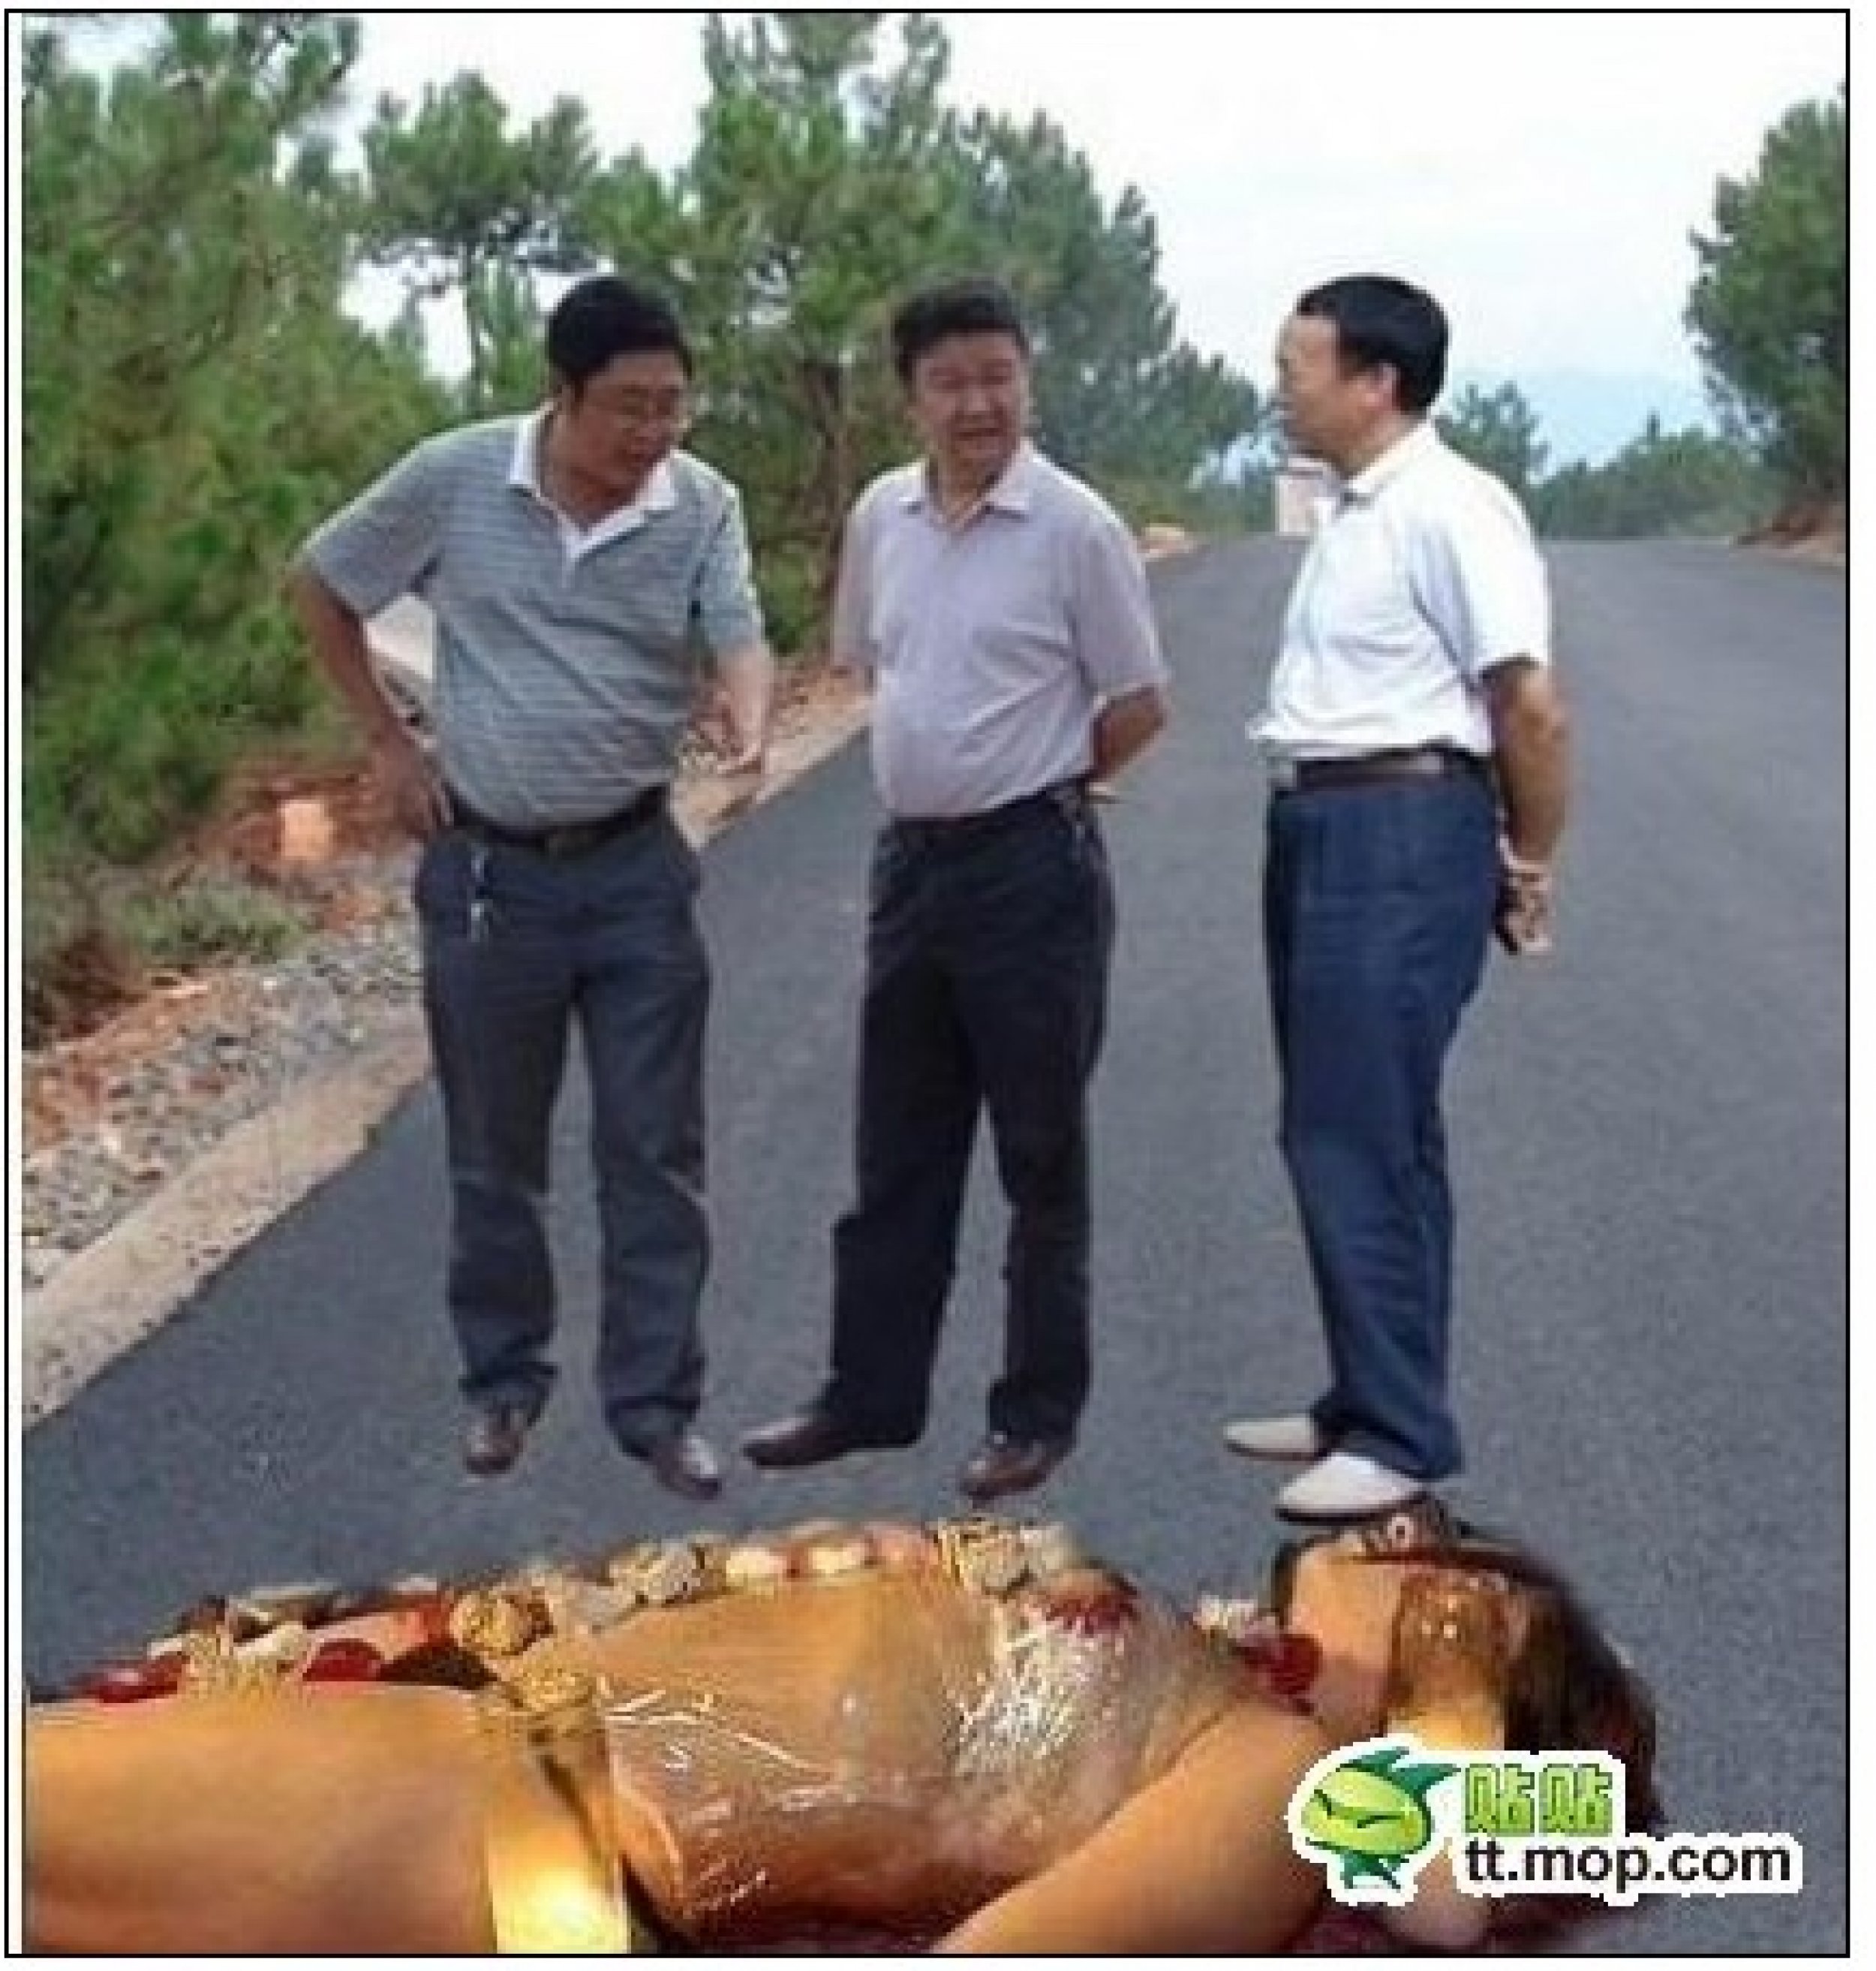 The 3 Chinese government officials do not care about the naked woman.